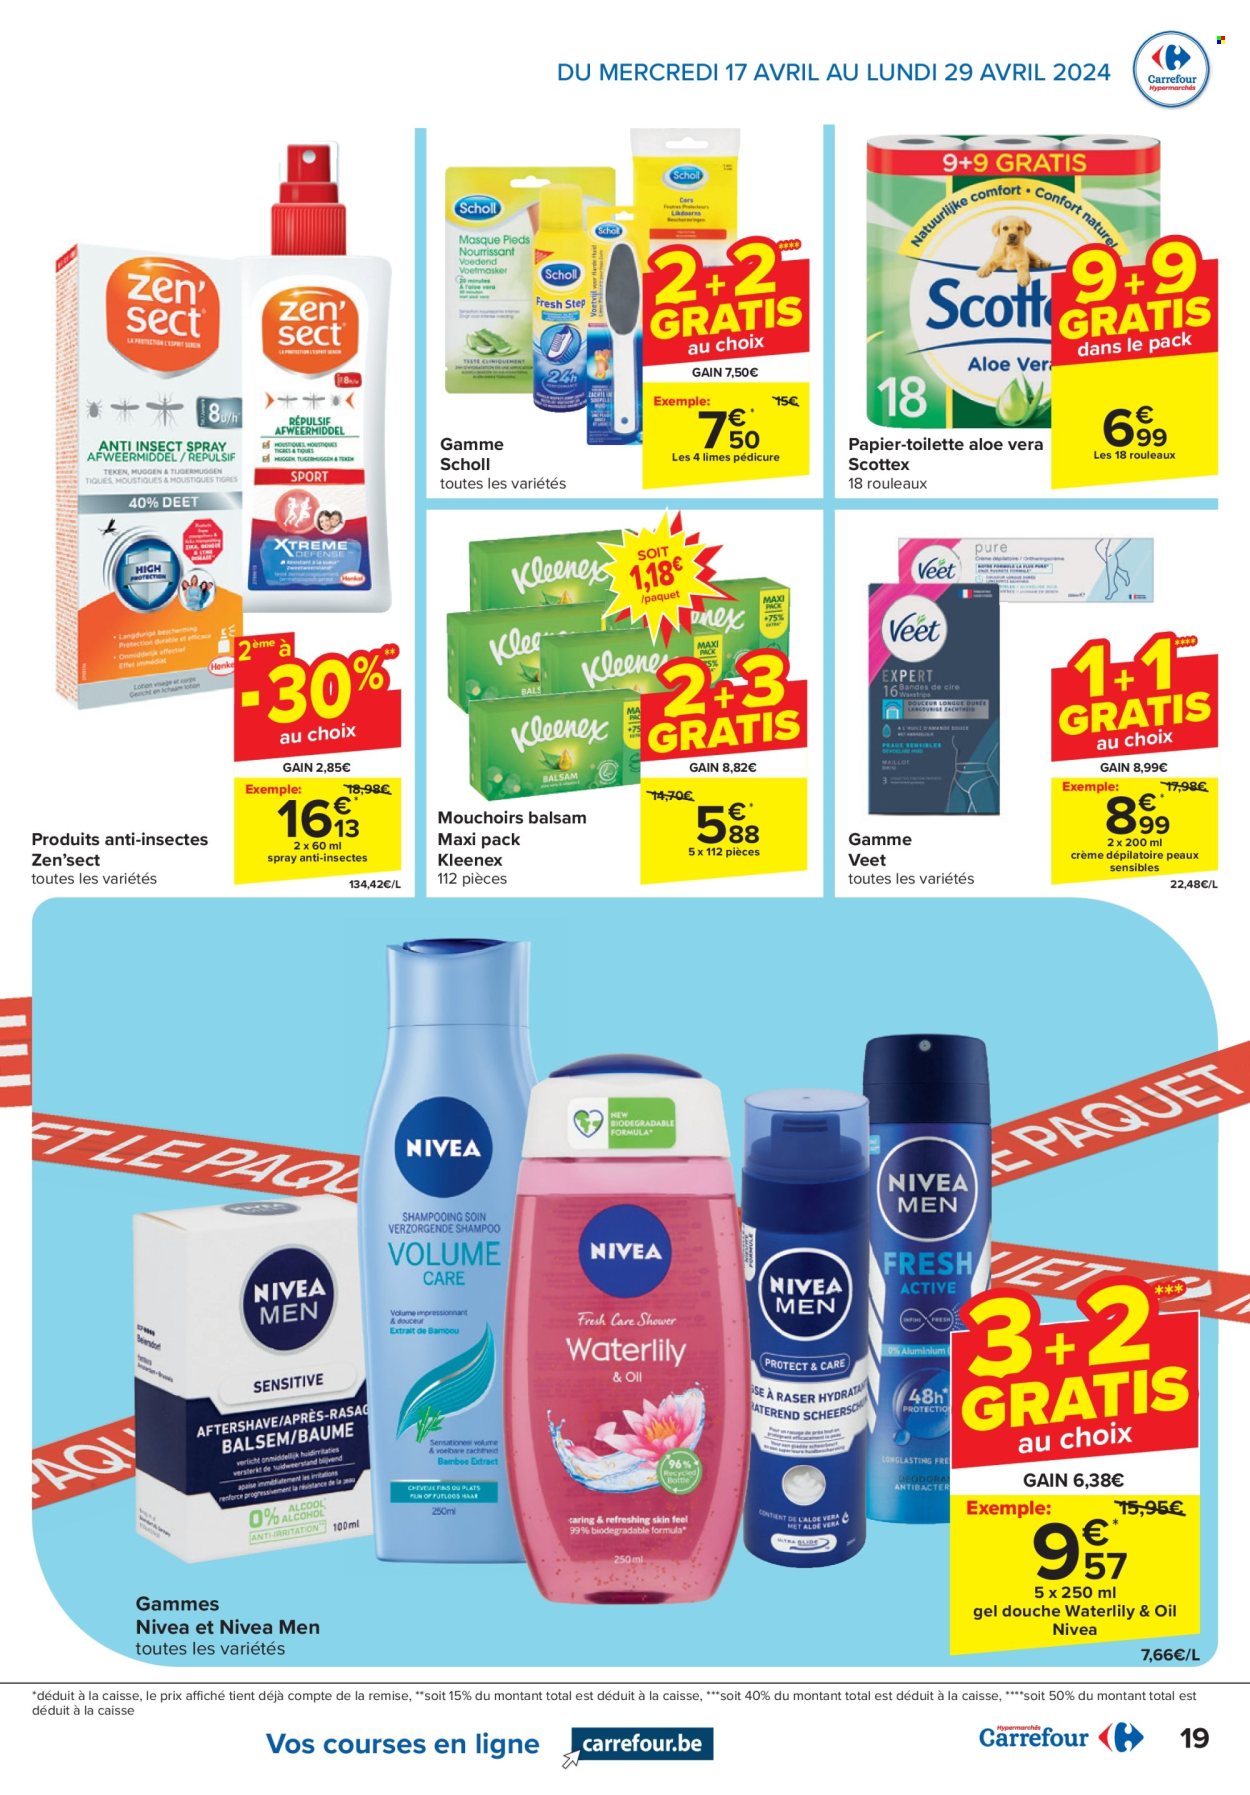 Catalogue Carrefour hypermarkt - 17.4.2024 - 29.4.2024. Page 19.